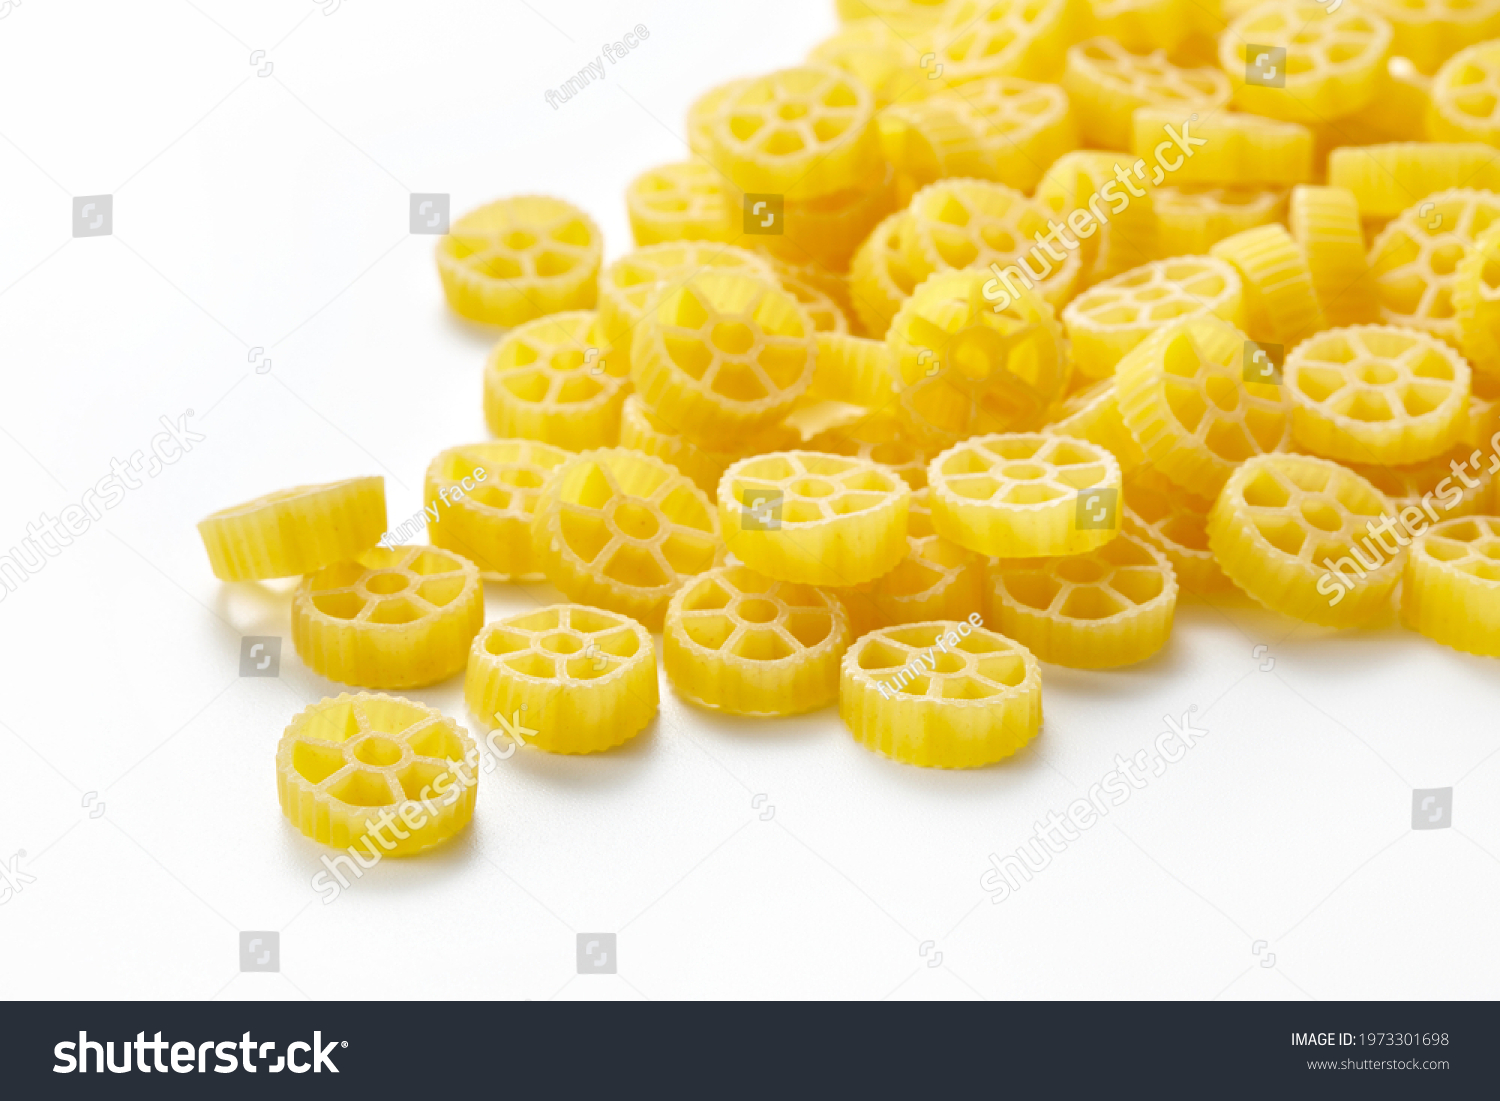 Rotelle or ruote is a type of pasta resembling wheels with spokes. They are similar to fiori. #1973301698